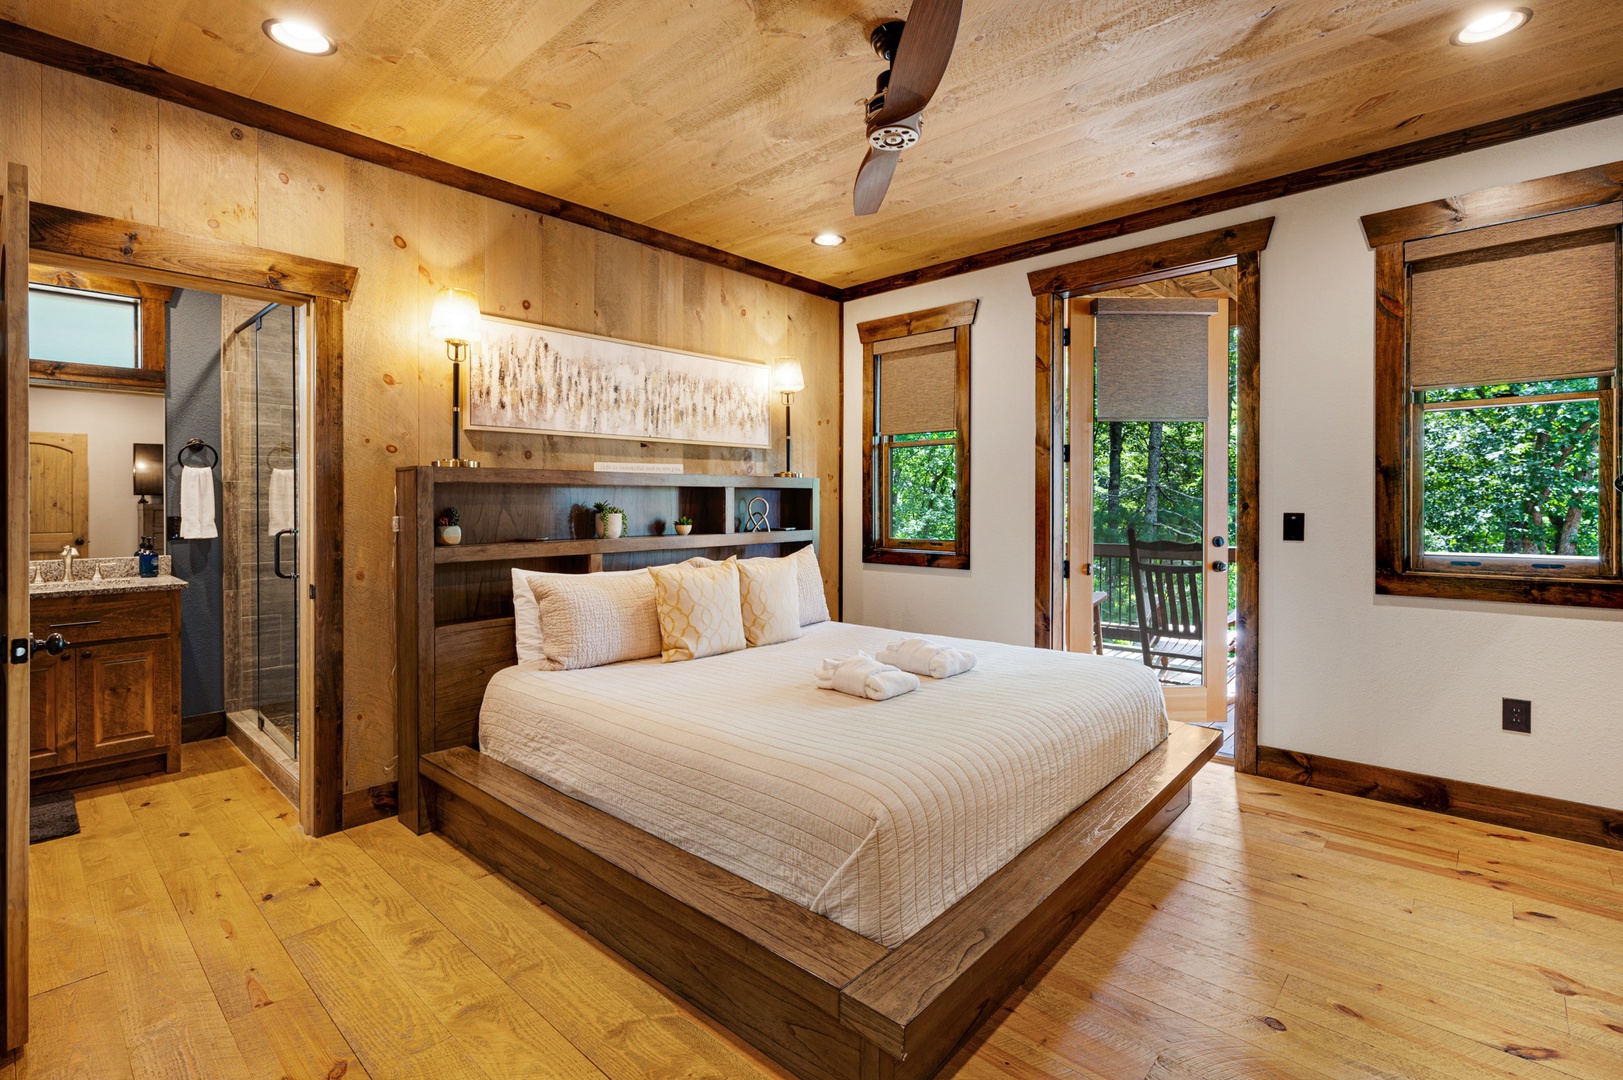 Mountain Echoes-Entry level king bedroom suite and master bedroom attached